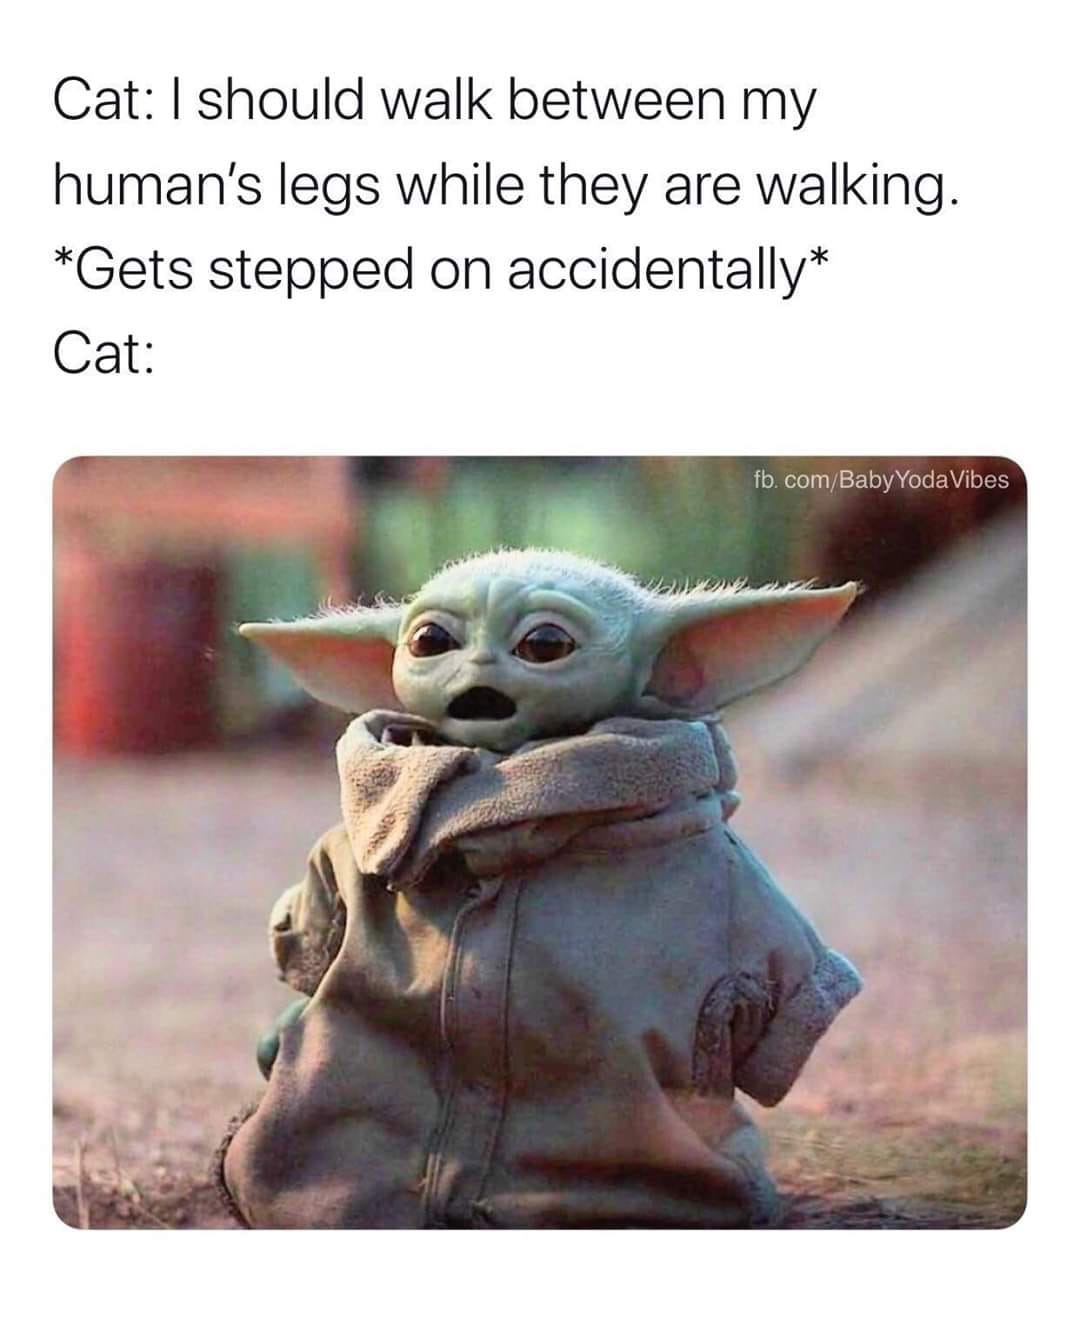 Yoda - Cat I should walk between my human's legs while they are walking. Gets stepped on accidentally Cat fb.comBaby YodaVibes